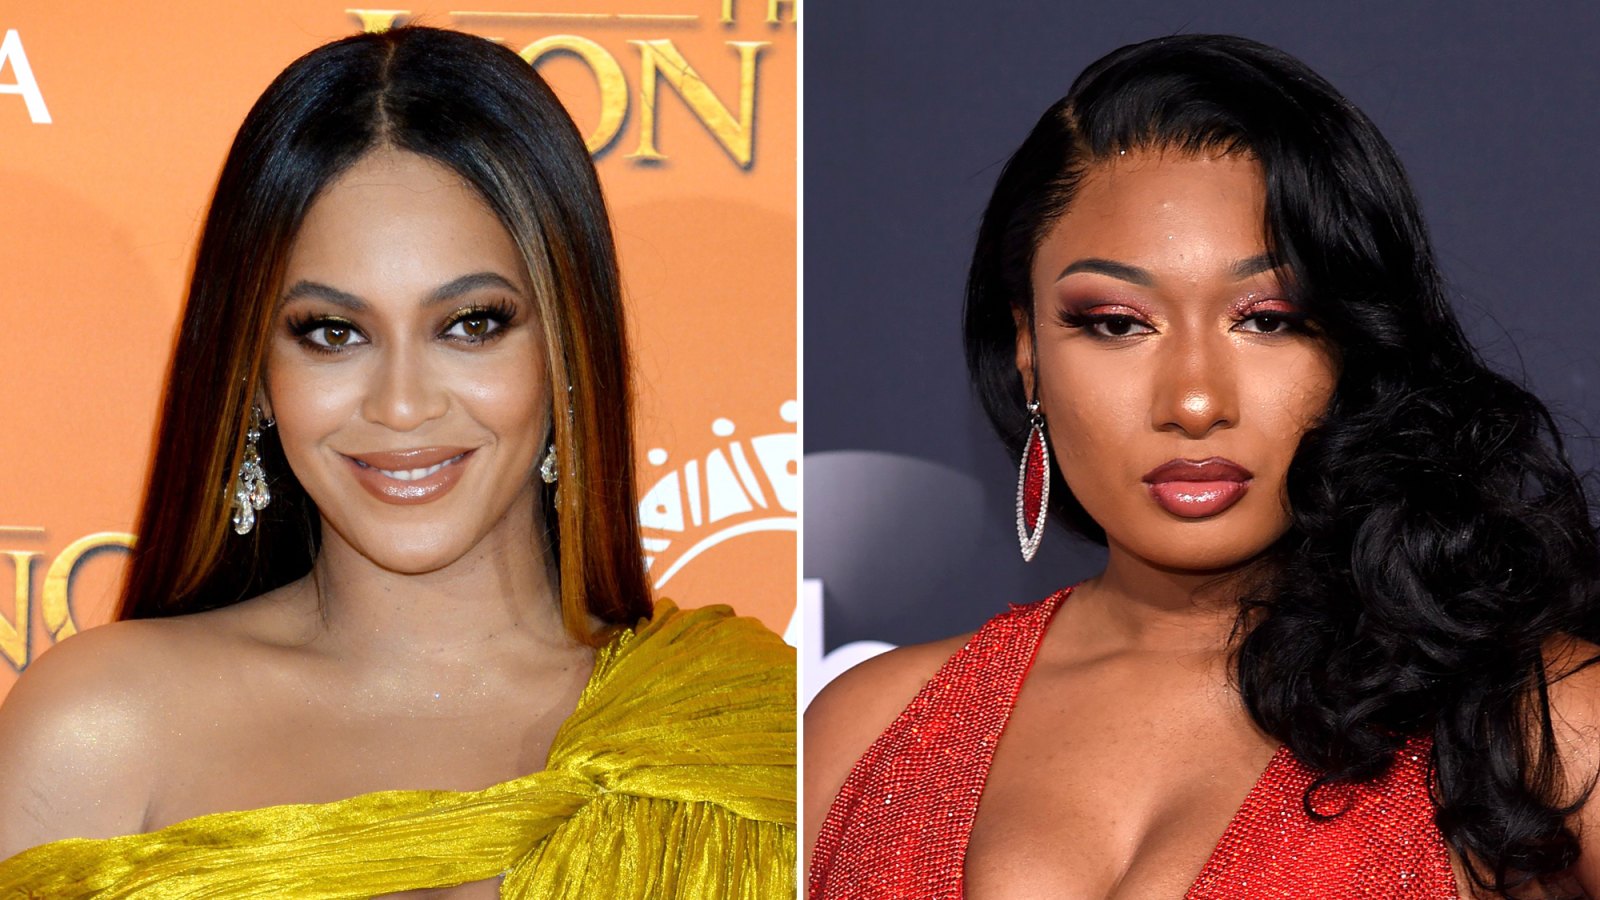 Beyonce Teams Up With Megan Thee Stallion for COVID-19 Relief Efforts, Releases ‘Savage’ Remix